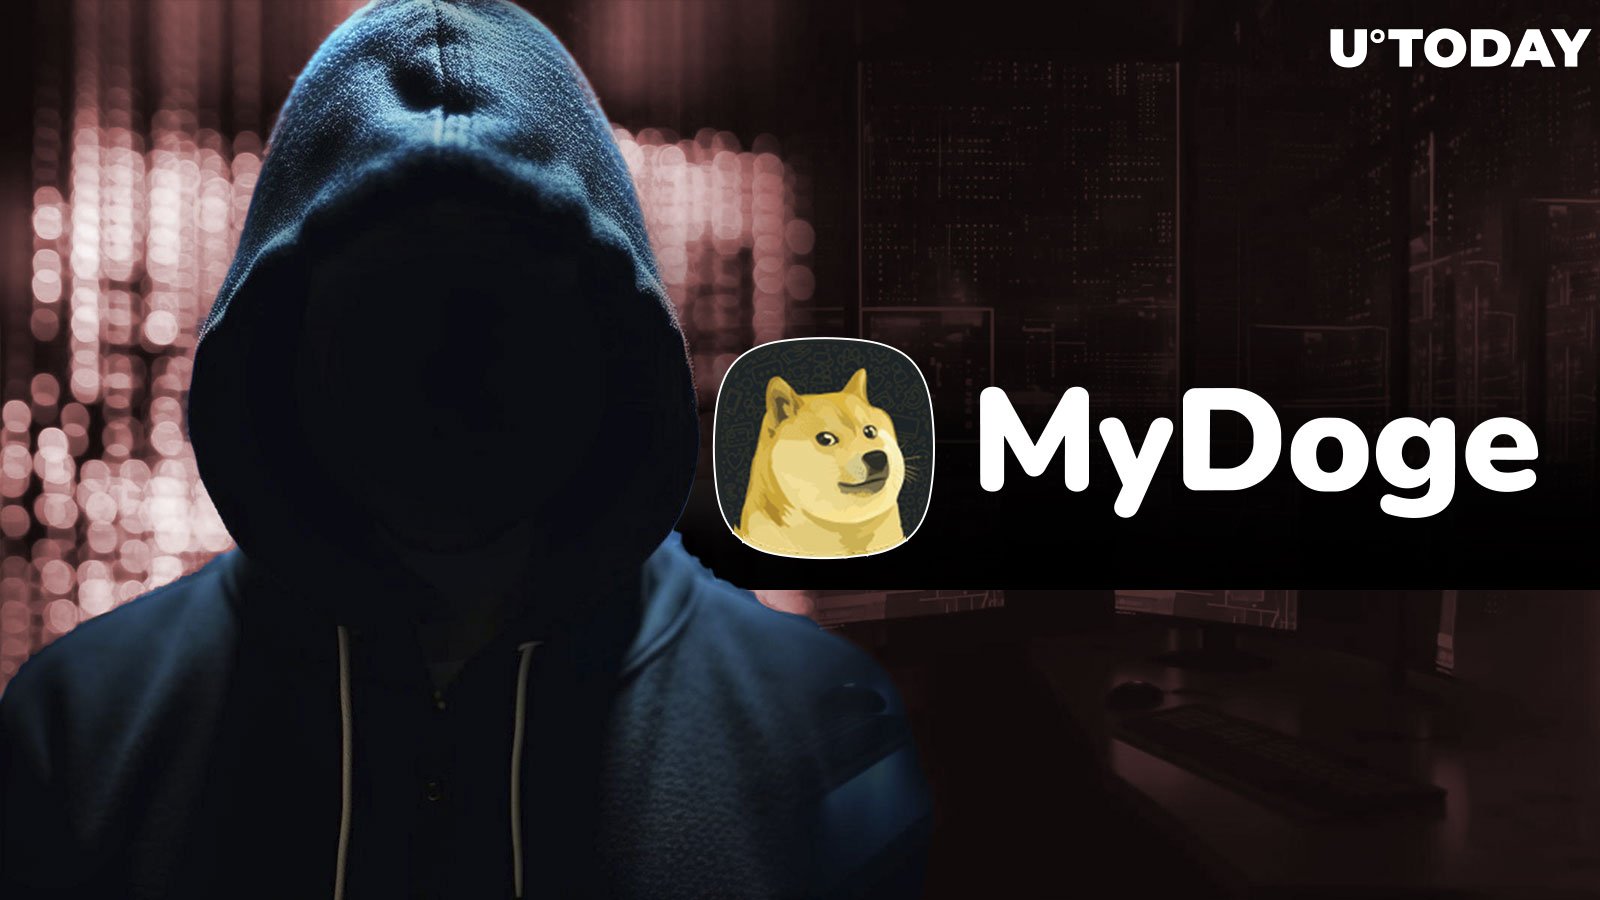 MyDoge Account Hacked, Mobile App and Wallets Secure